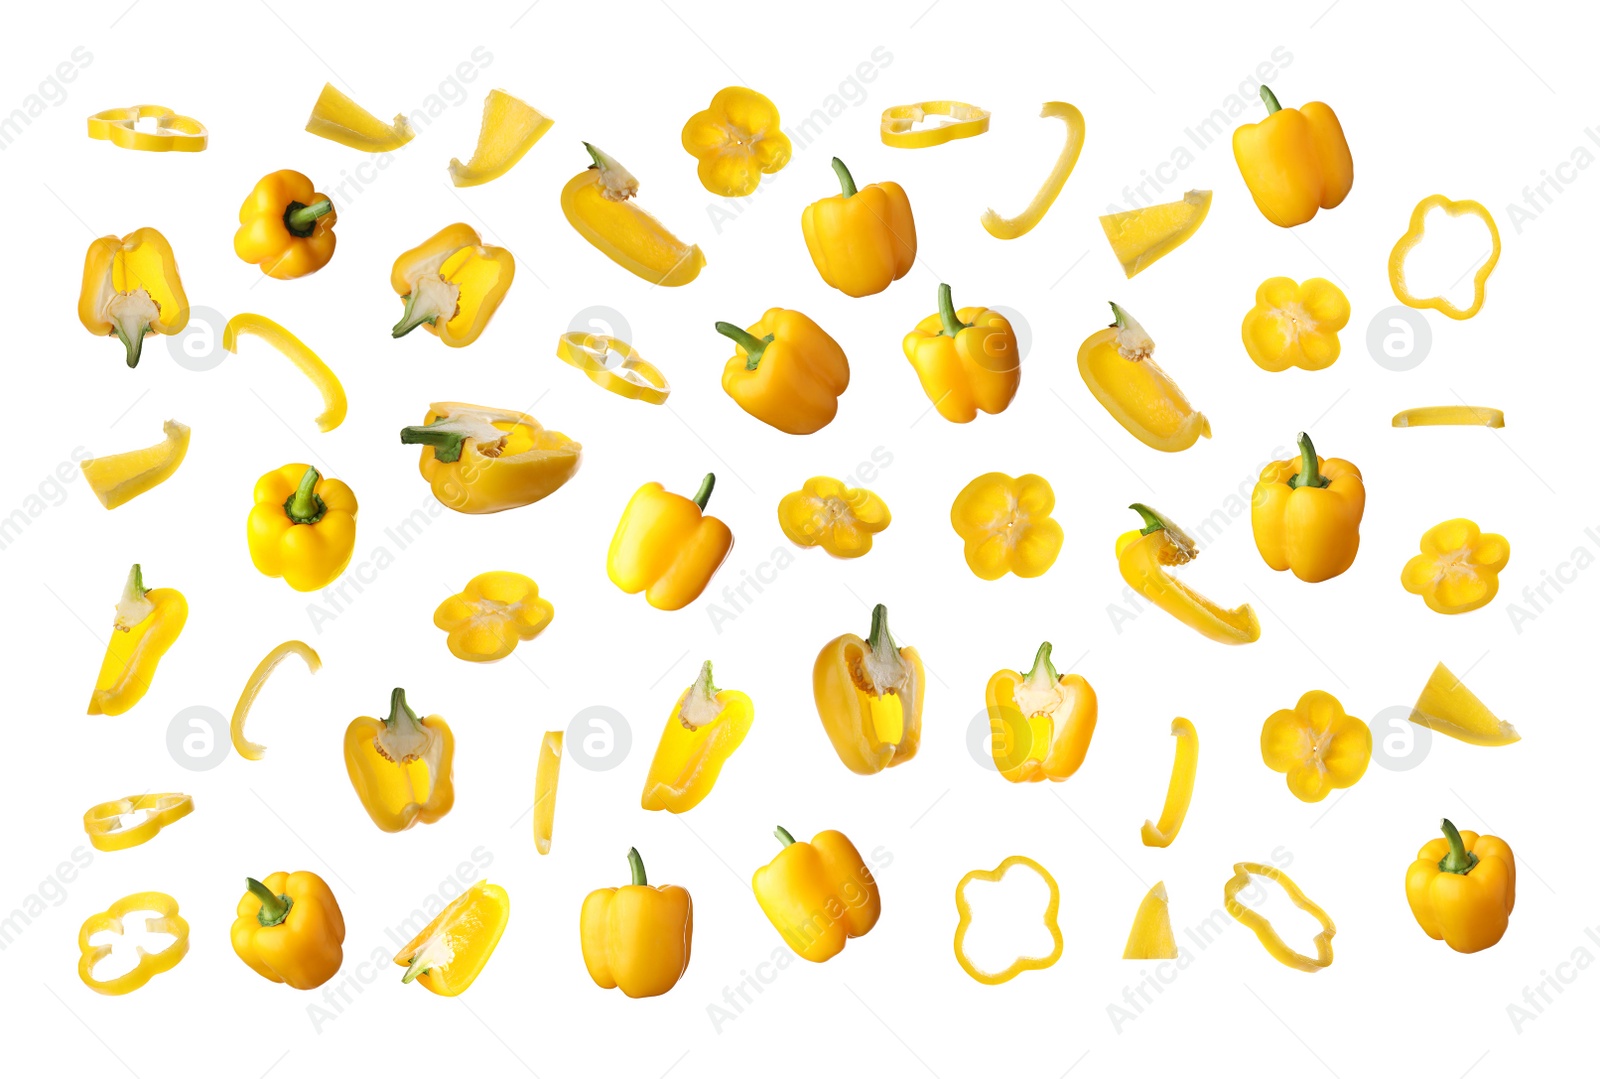 Image of Set of ripe yellow bell peppers on white background